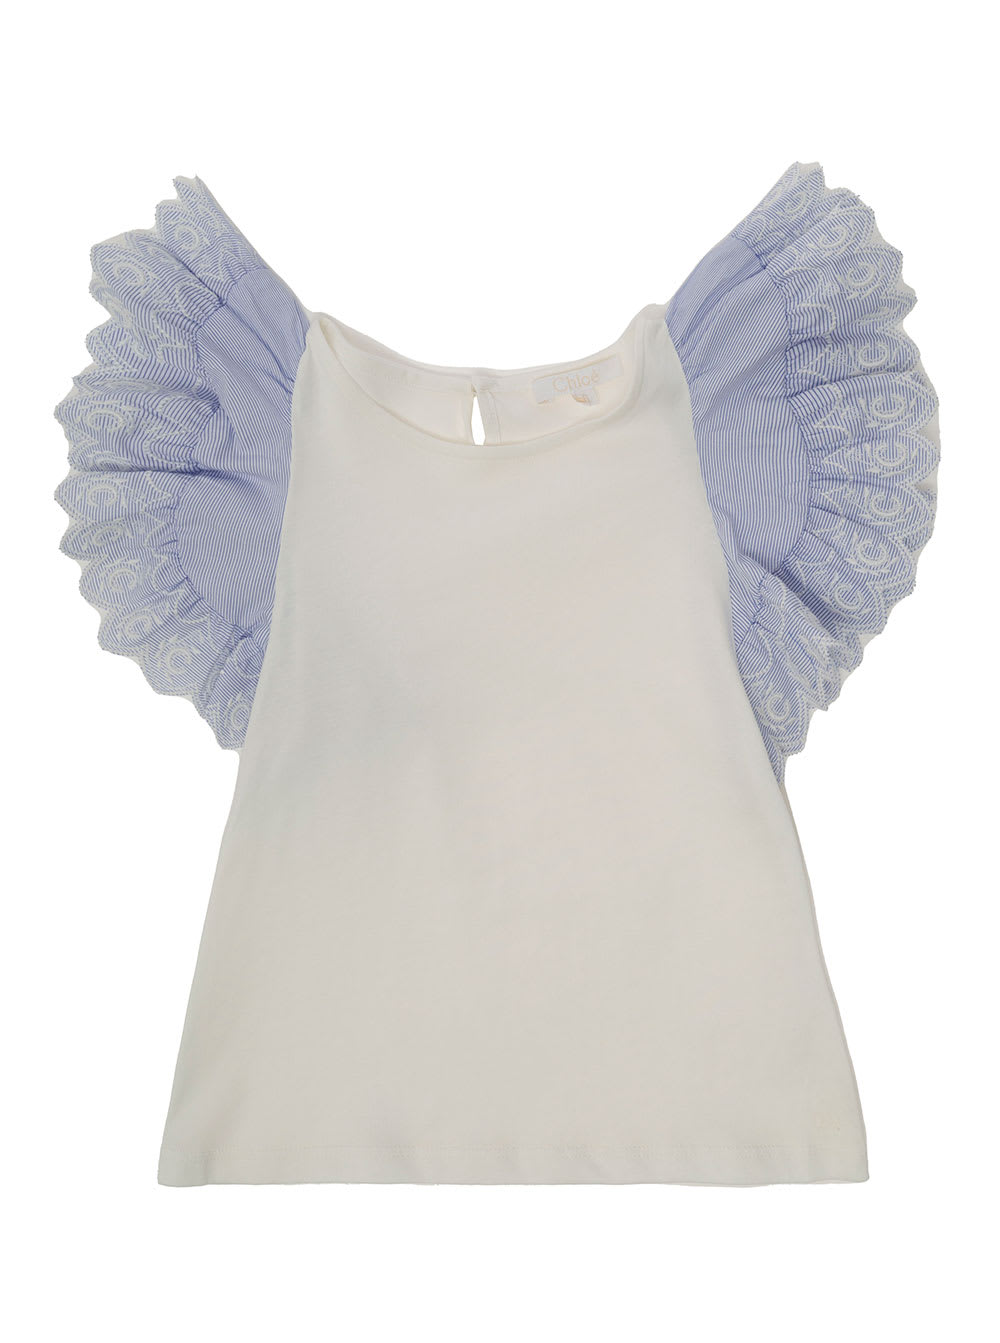 Chloé Girl Cotton White Top With Frills